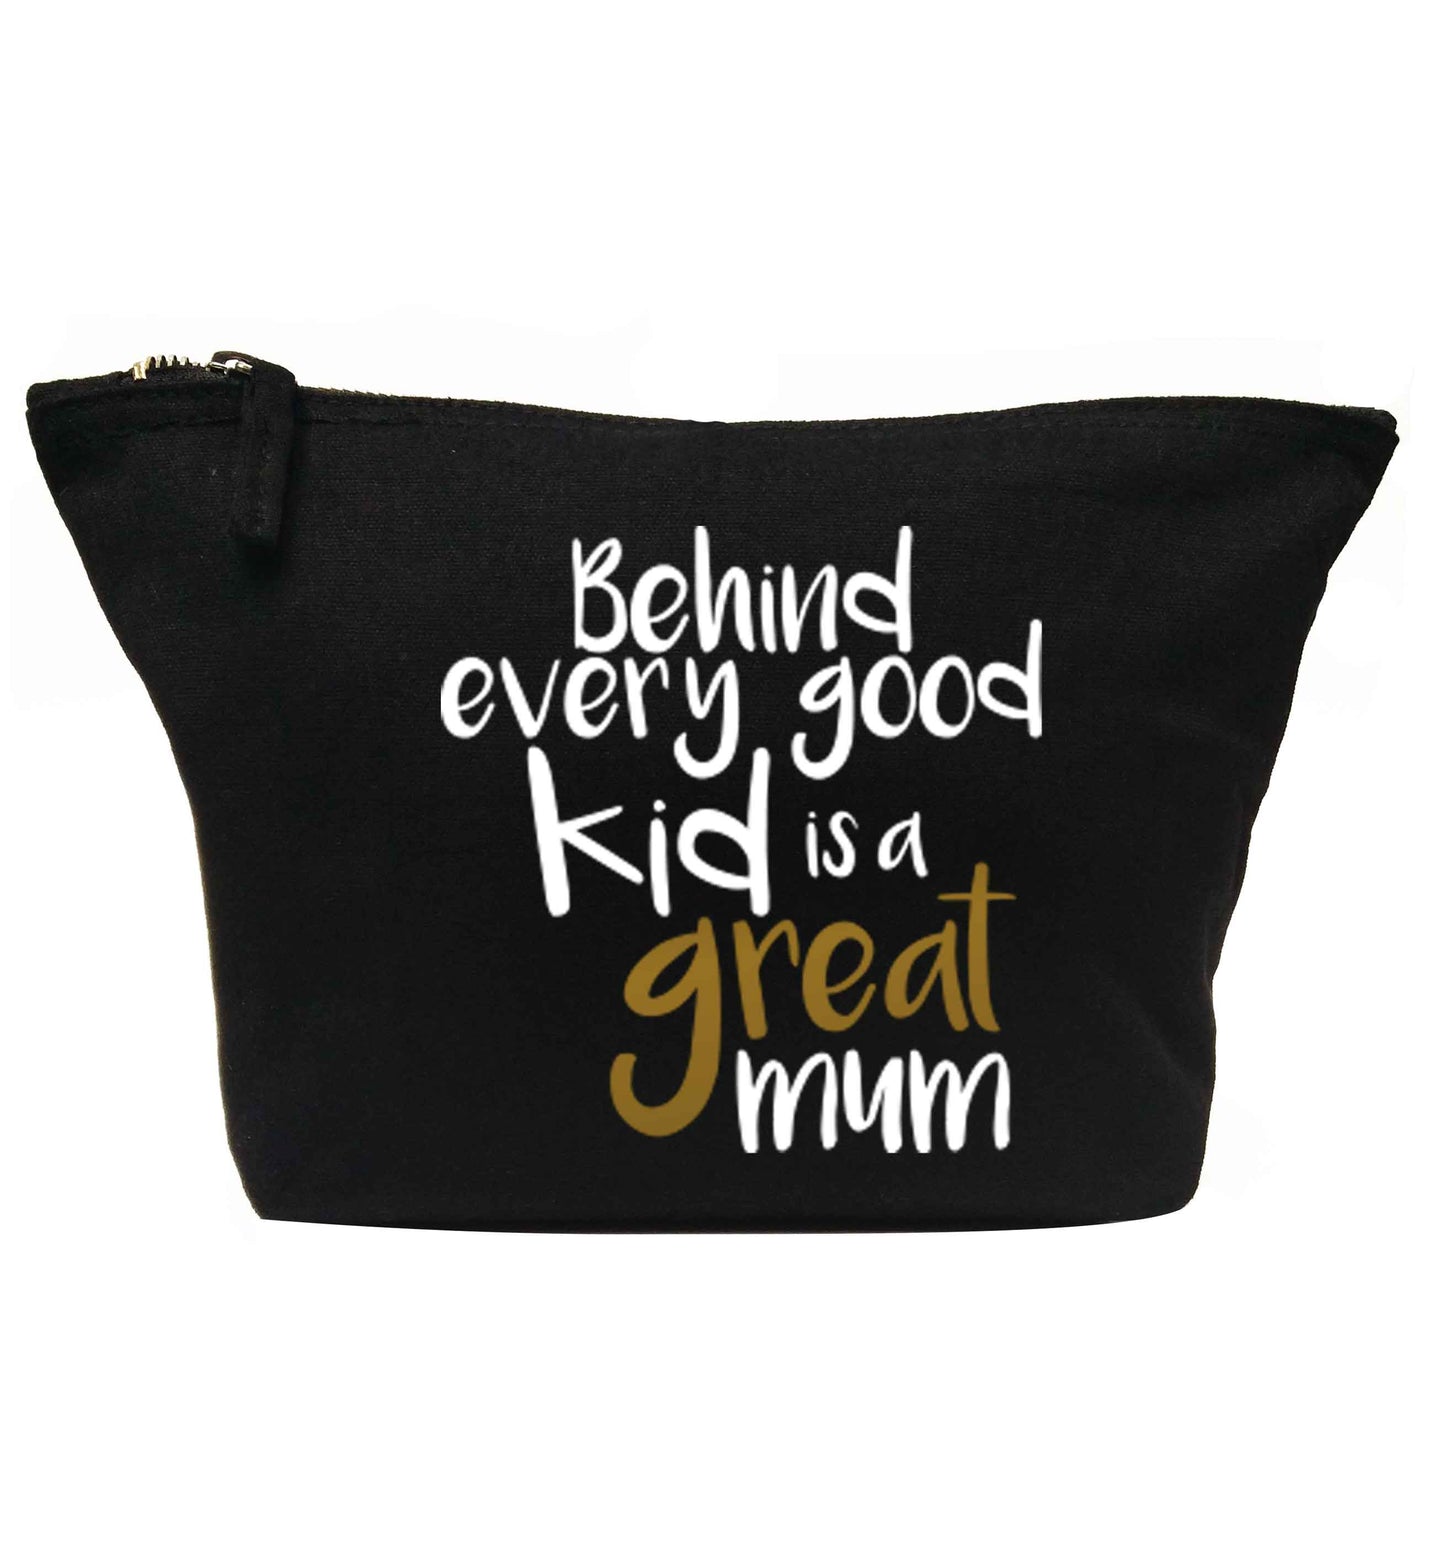 Behind every good kid is a great mum | Makeup / wash bag